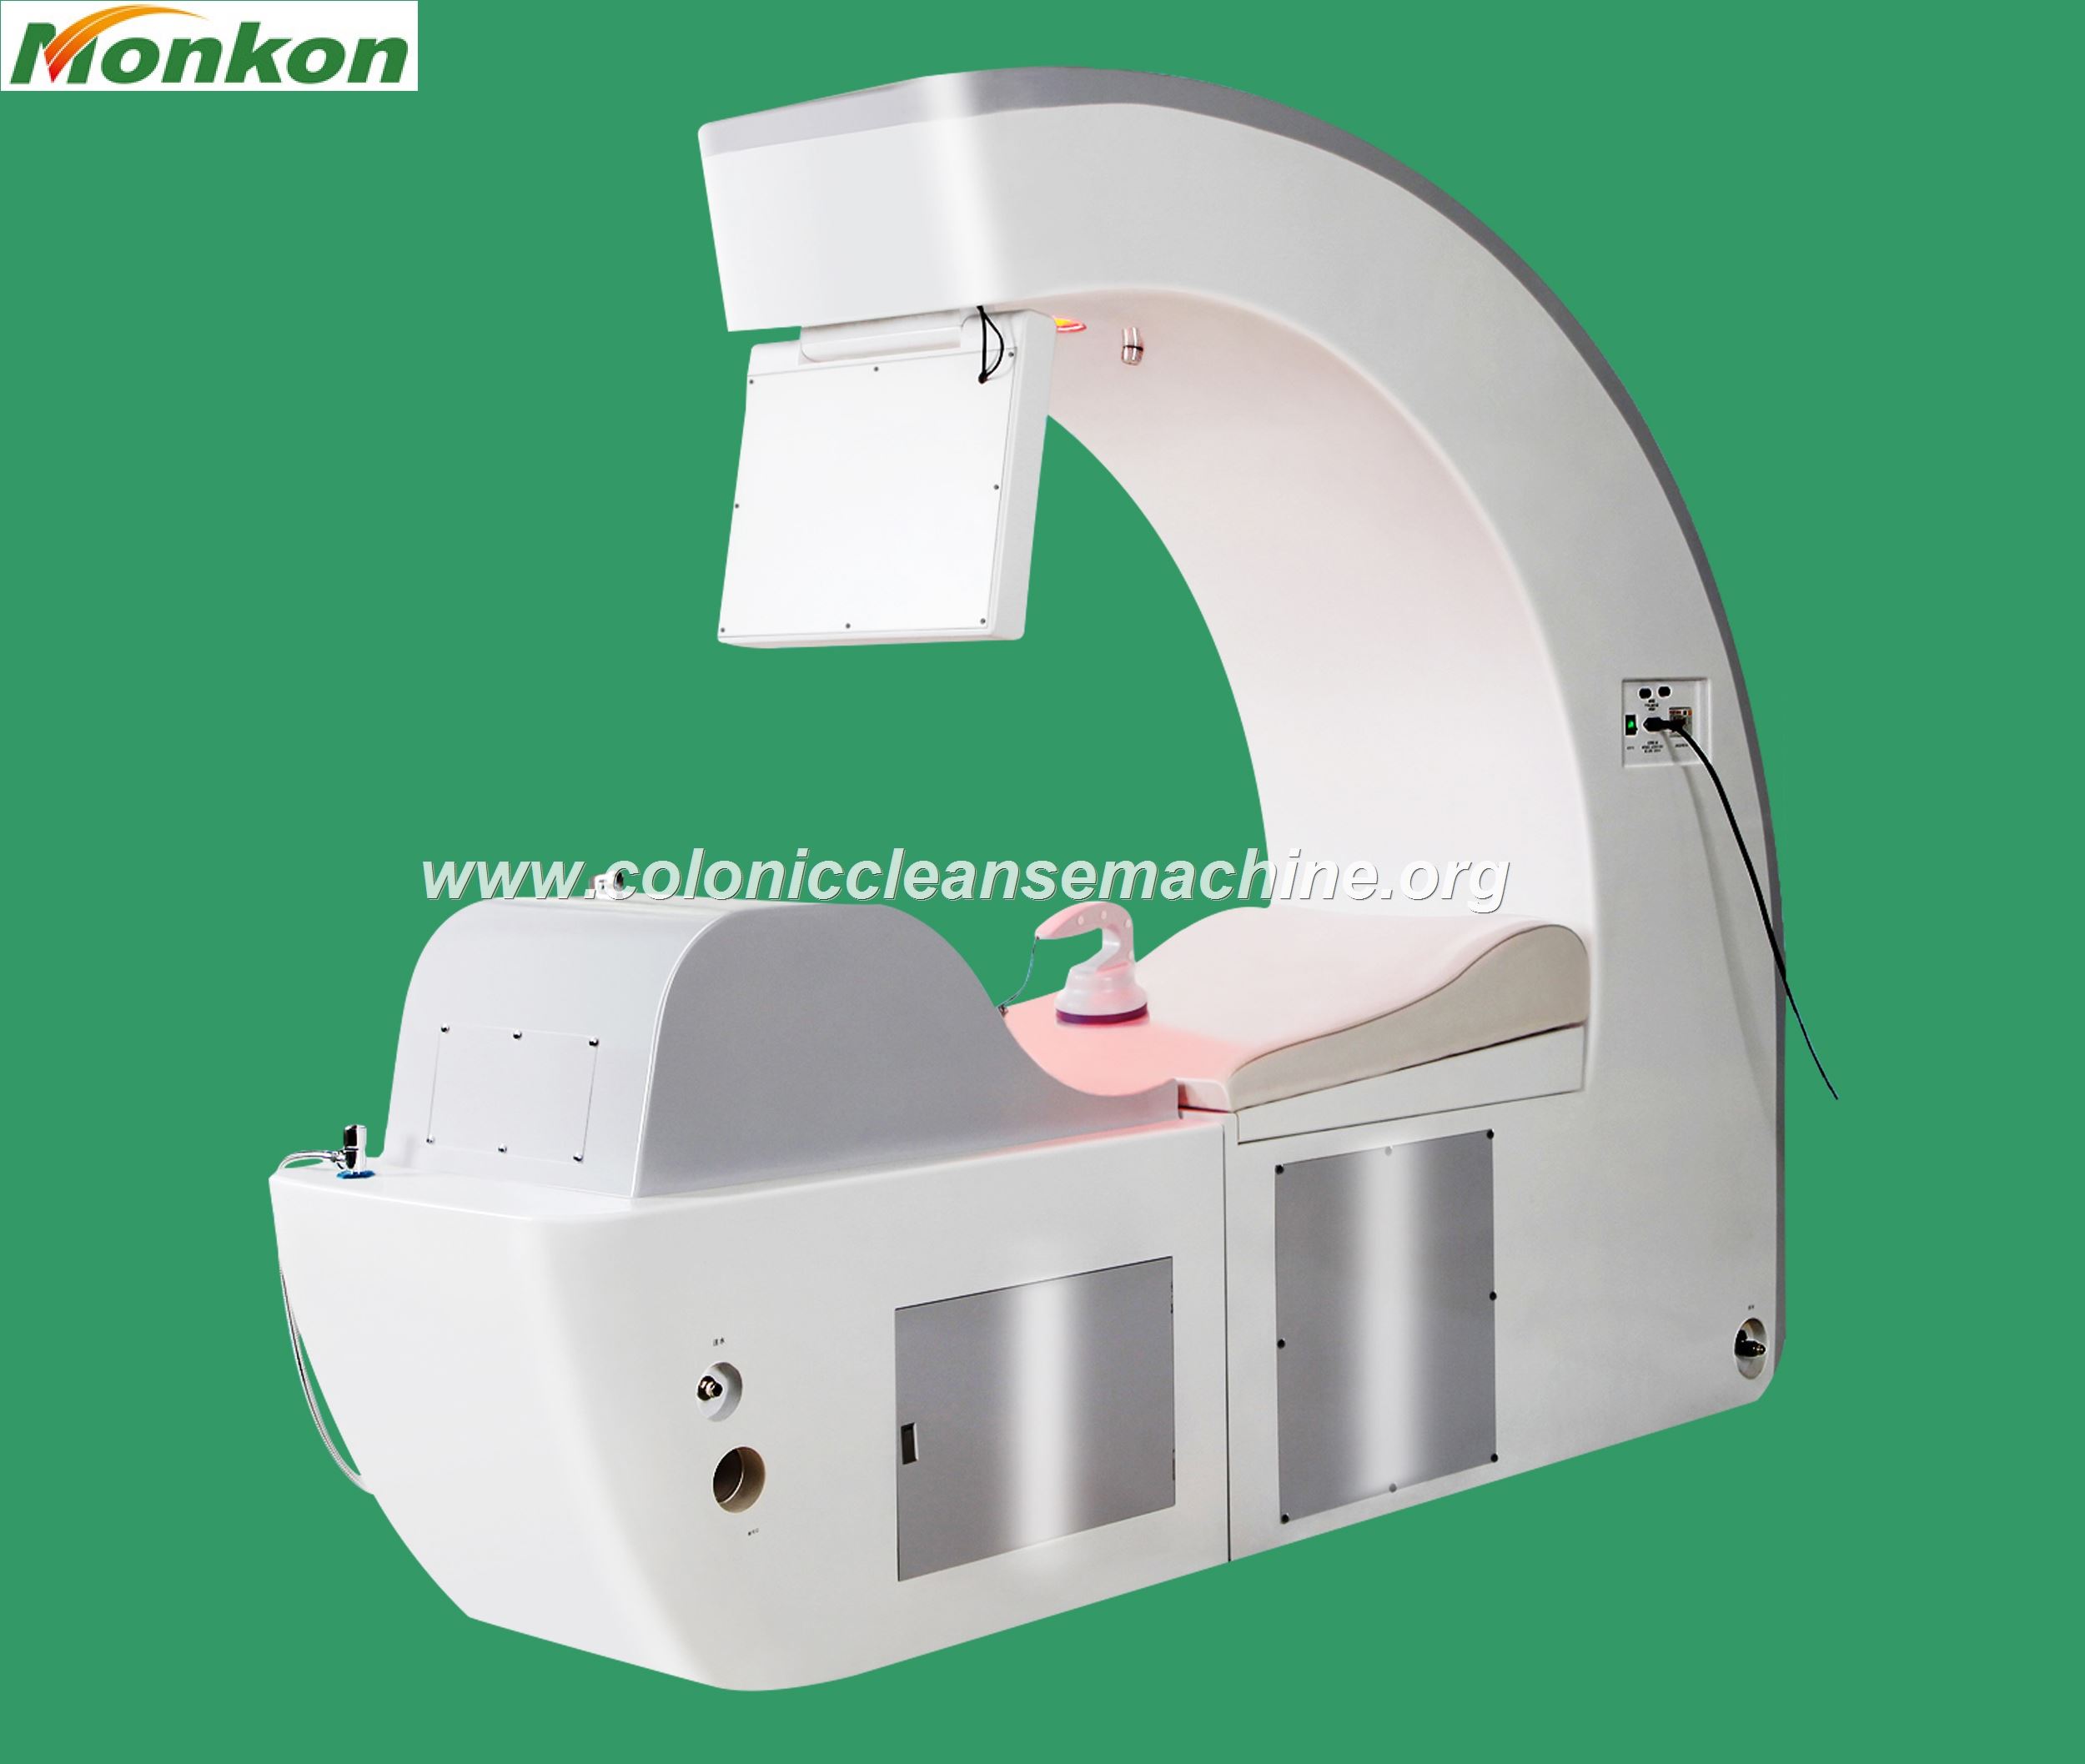 MAIKONG colon cleansing machine price